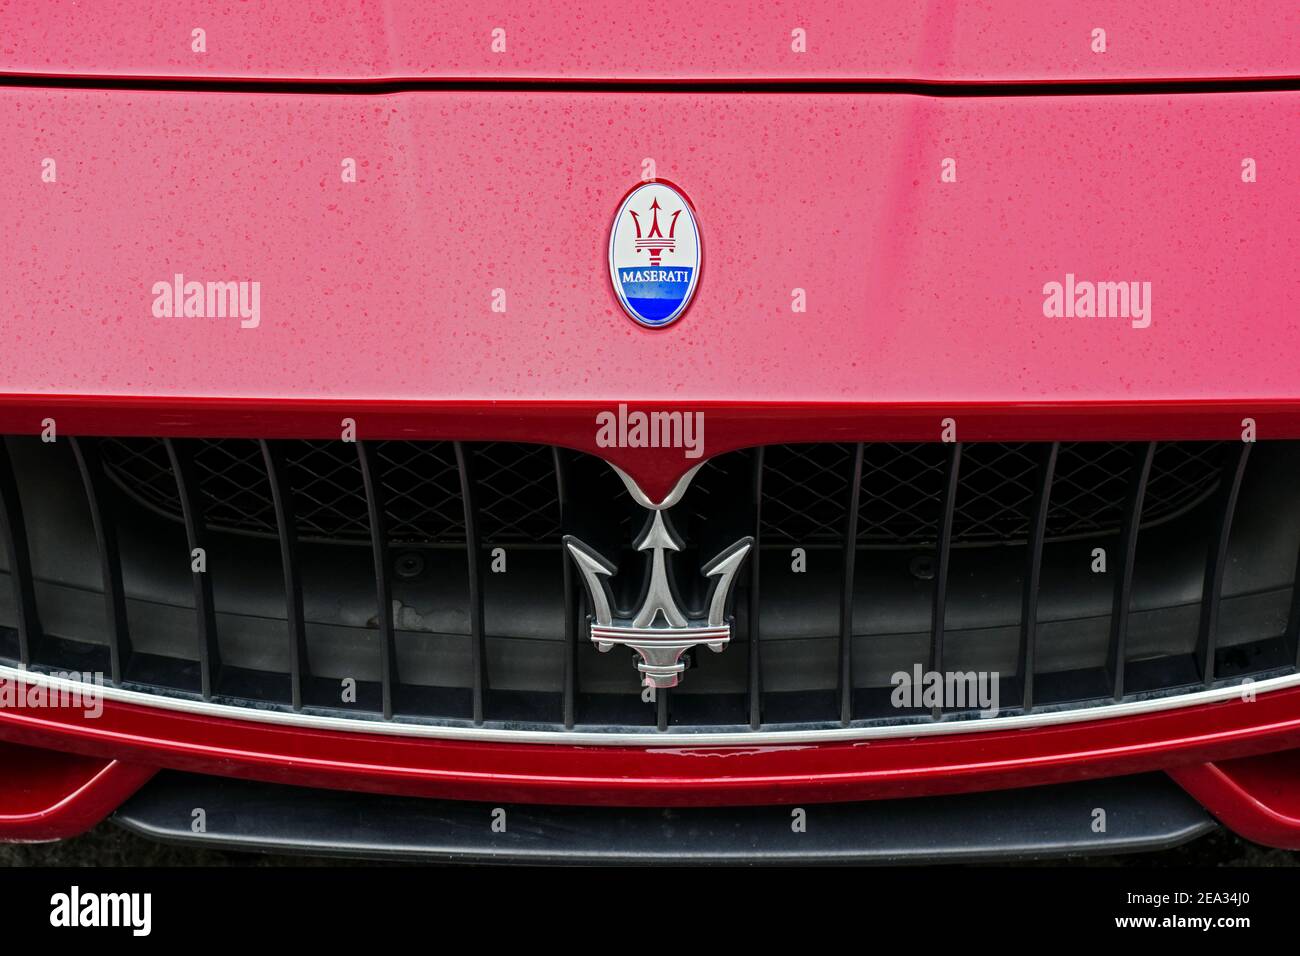 The front end of an imported 2014 Maserati showing the grill and logo. In Brooklyn, New York. Stock Photo